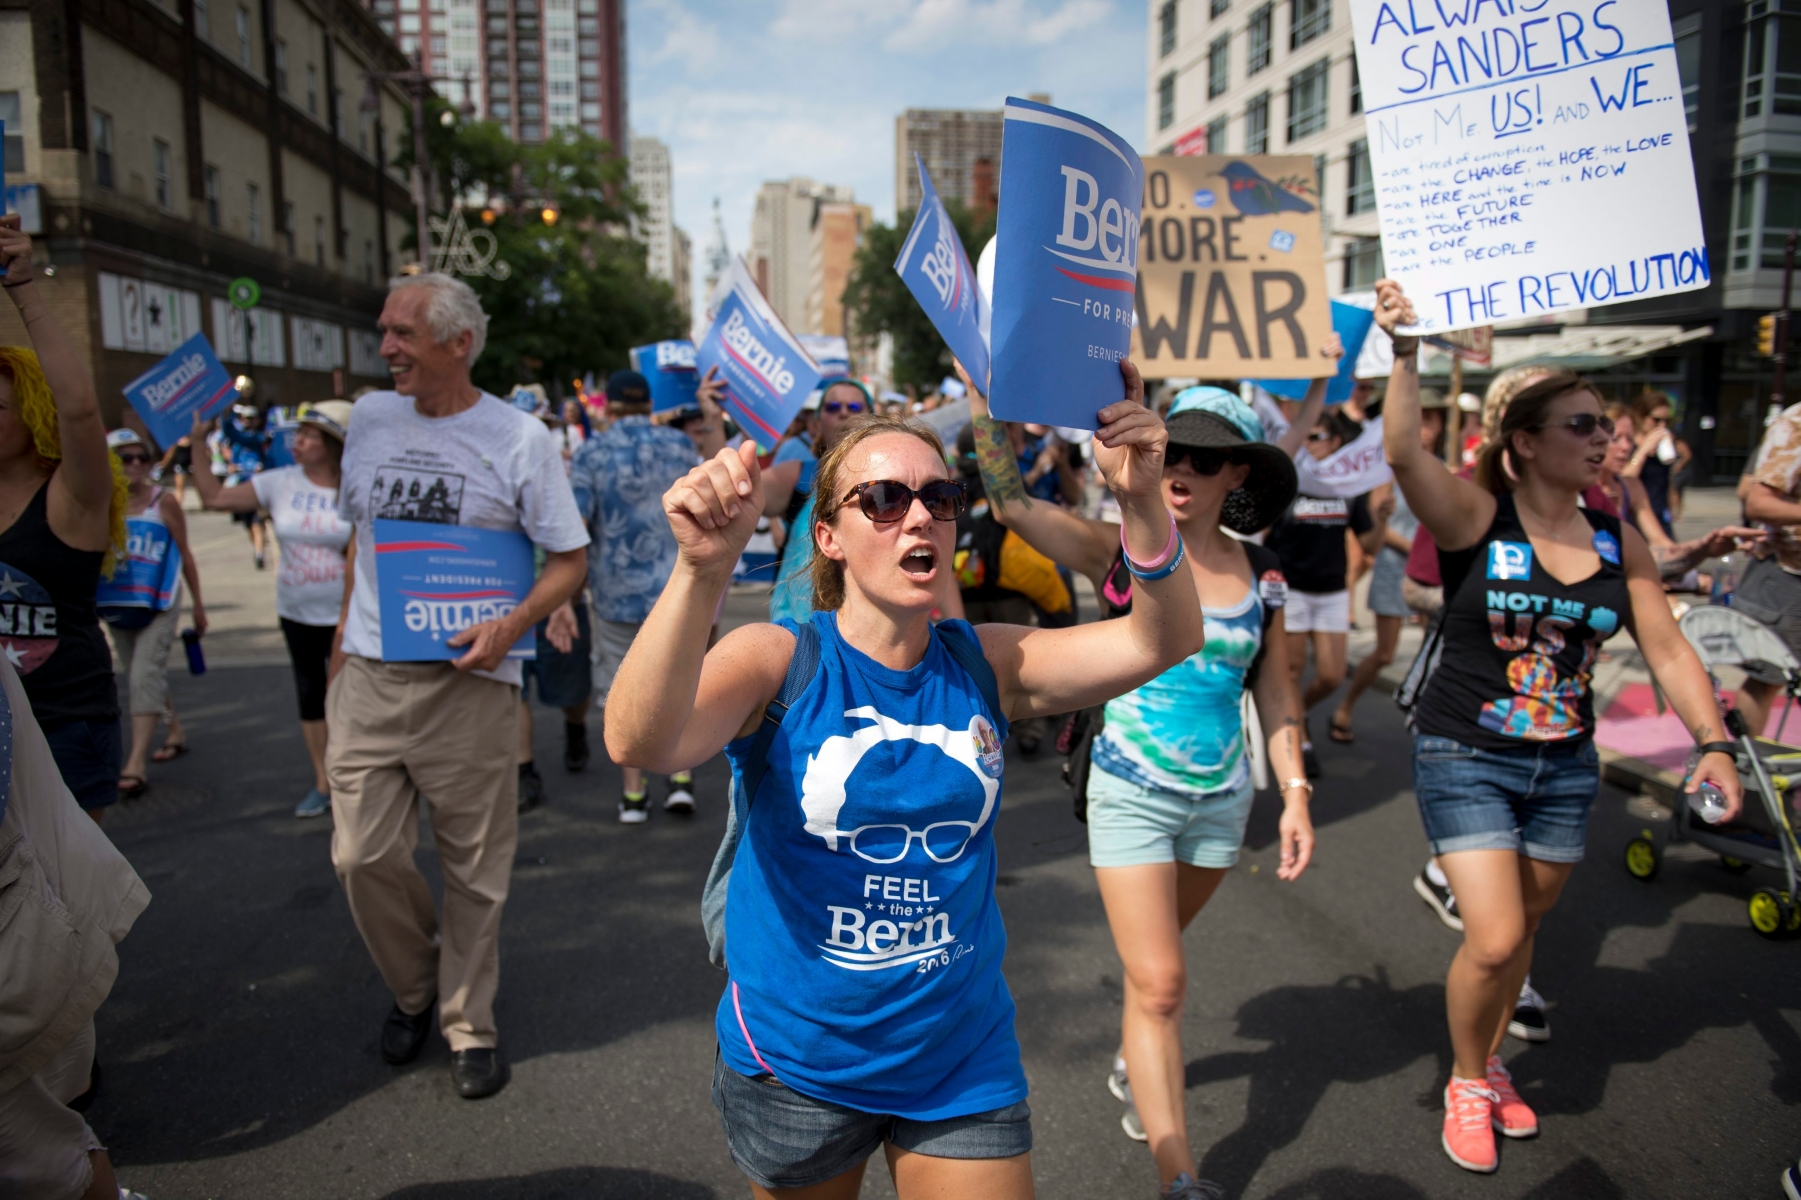 epa05439614 Protesters march in support of Bernie Sanders near the 2016 Democratic National Convention, held at the Wells Fargo Center in Philadelphia, Pennsylvania, USA, 24 July 2016. The Democratic Convention will open on 25 July 2016.  EPA/TRACIE VANAUKEN USA DEMOCRATIC NATIONAL CONVENTION